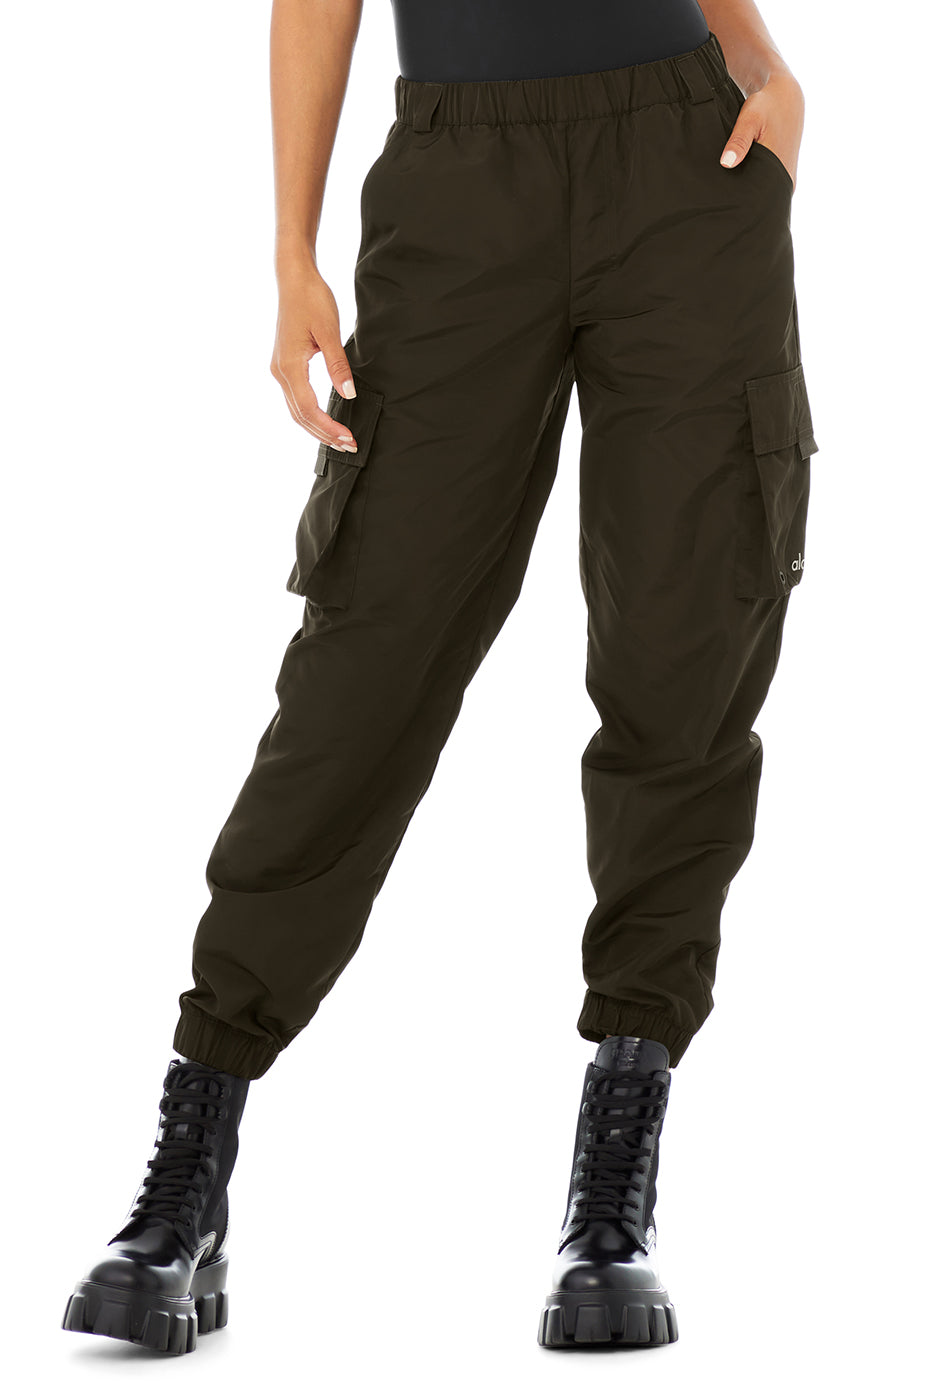 It Girl Pants in Dark Olive by Alo Yoga - Work Well Daily